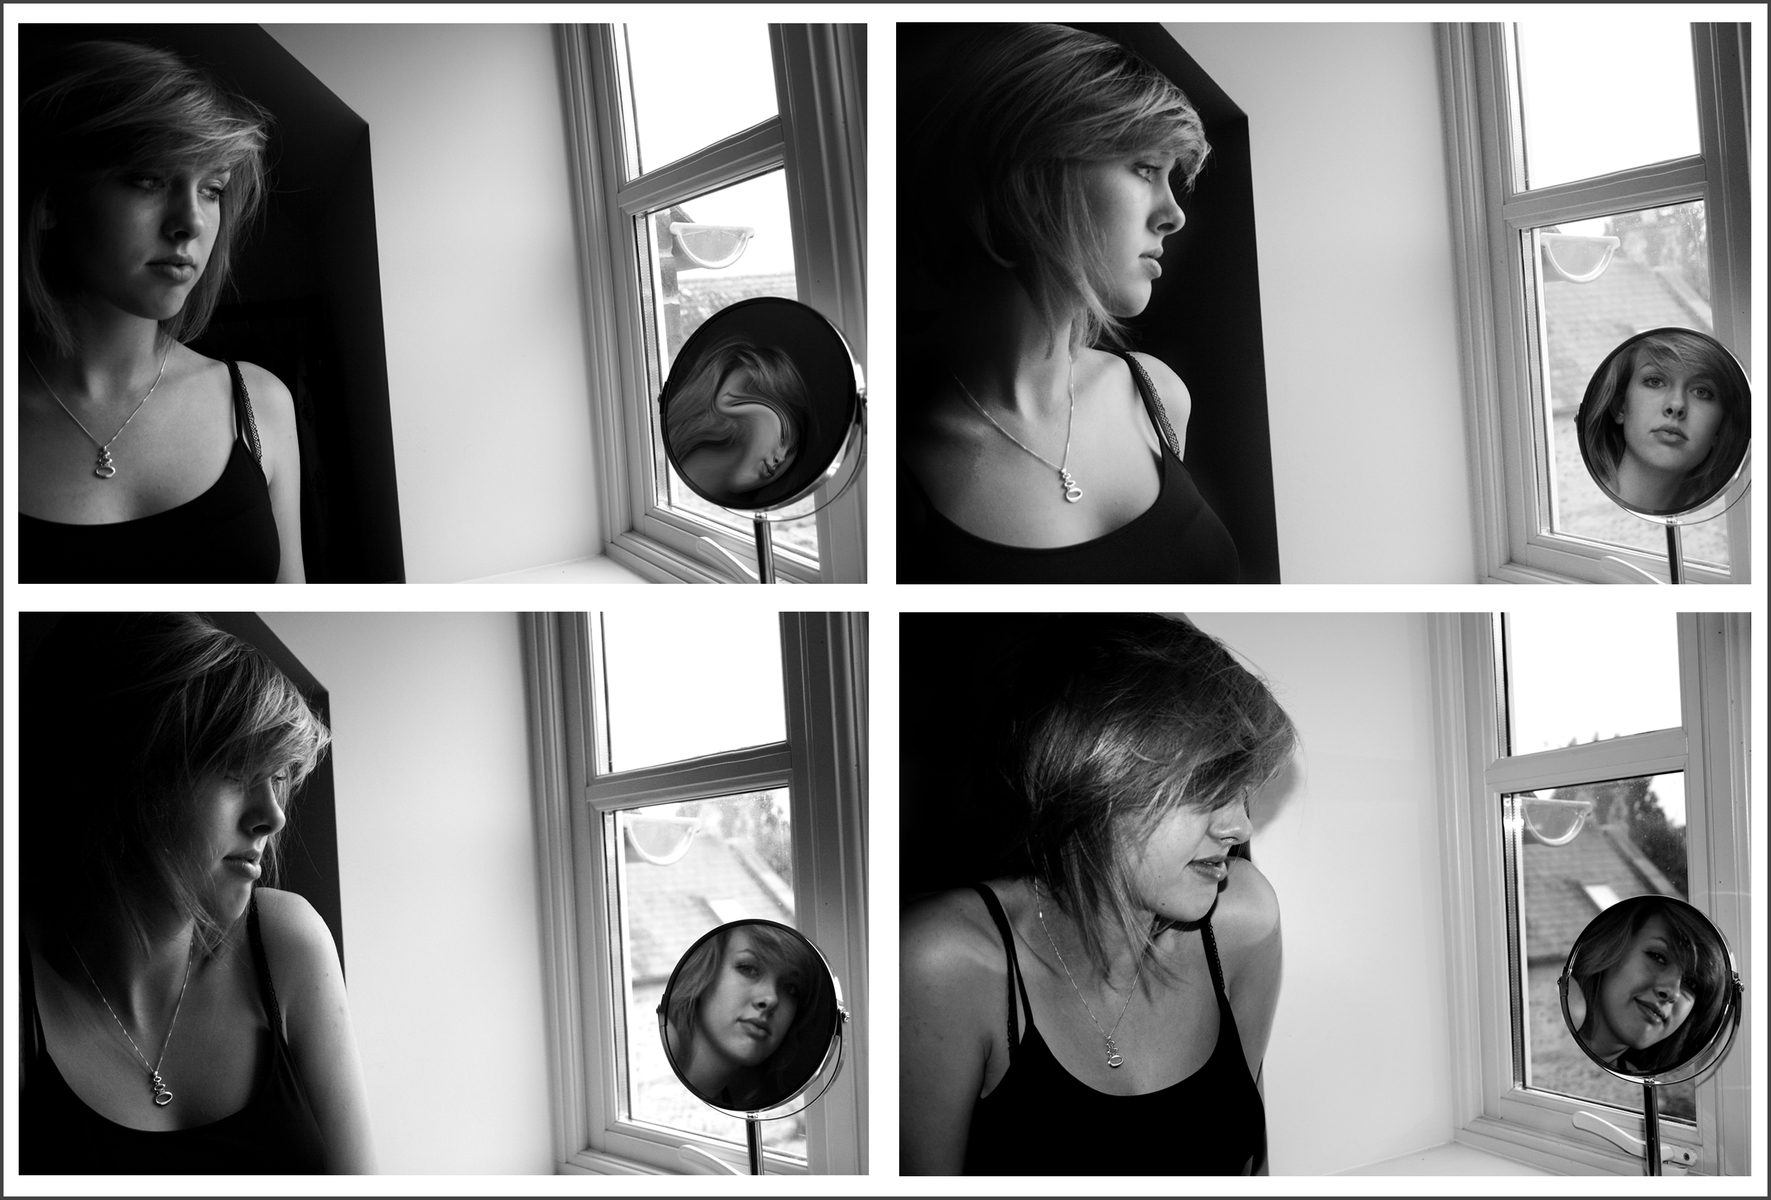 Here is one of my responses to Duane Michals. I was inspired by 